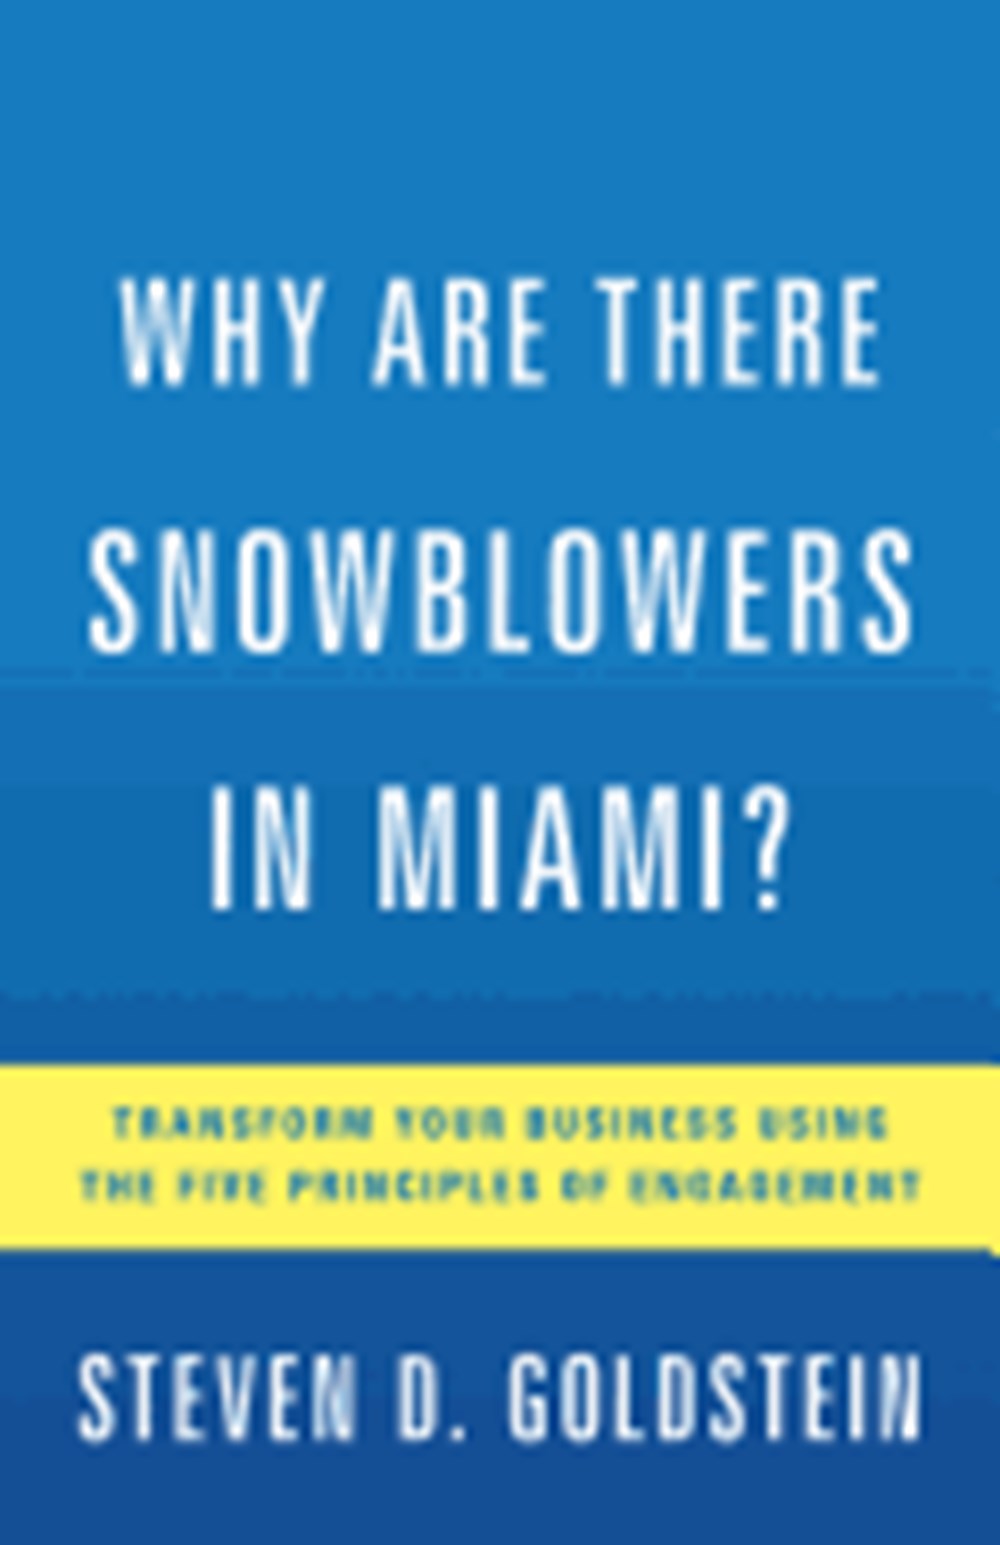 Why Are There Snowblowers in Miami? Transform Your Business Using the Five Principles of Engagement